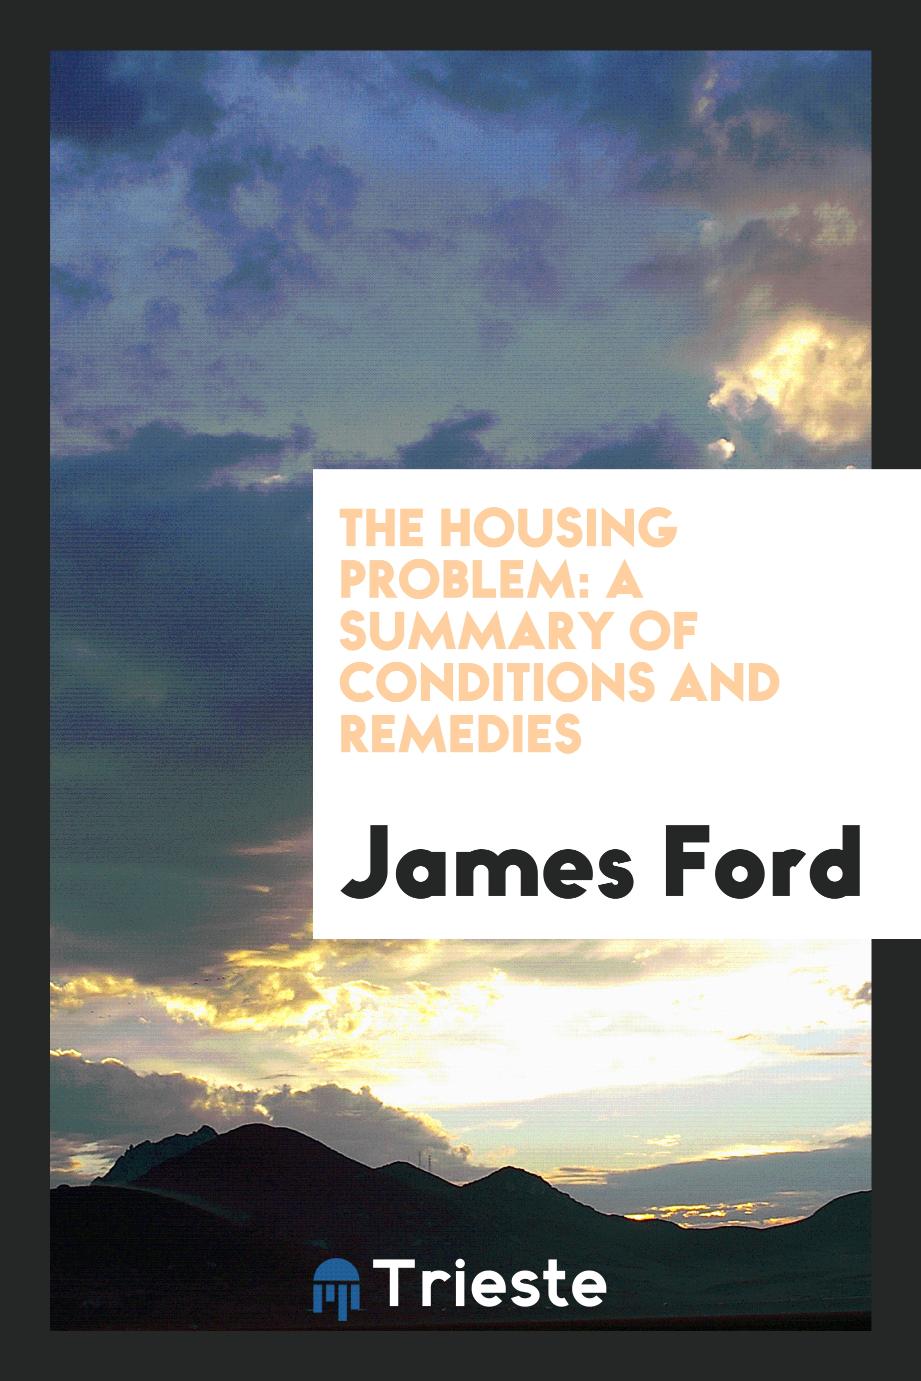 The Housing Problem: A Summary of Conditions and Remedies